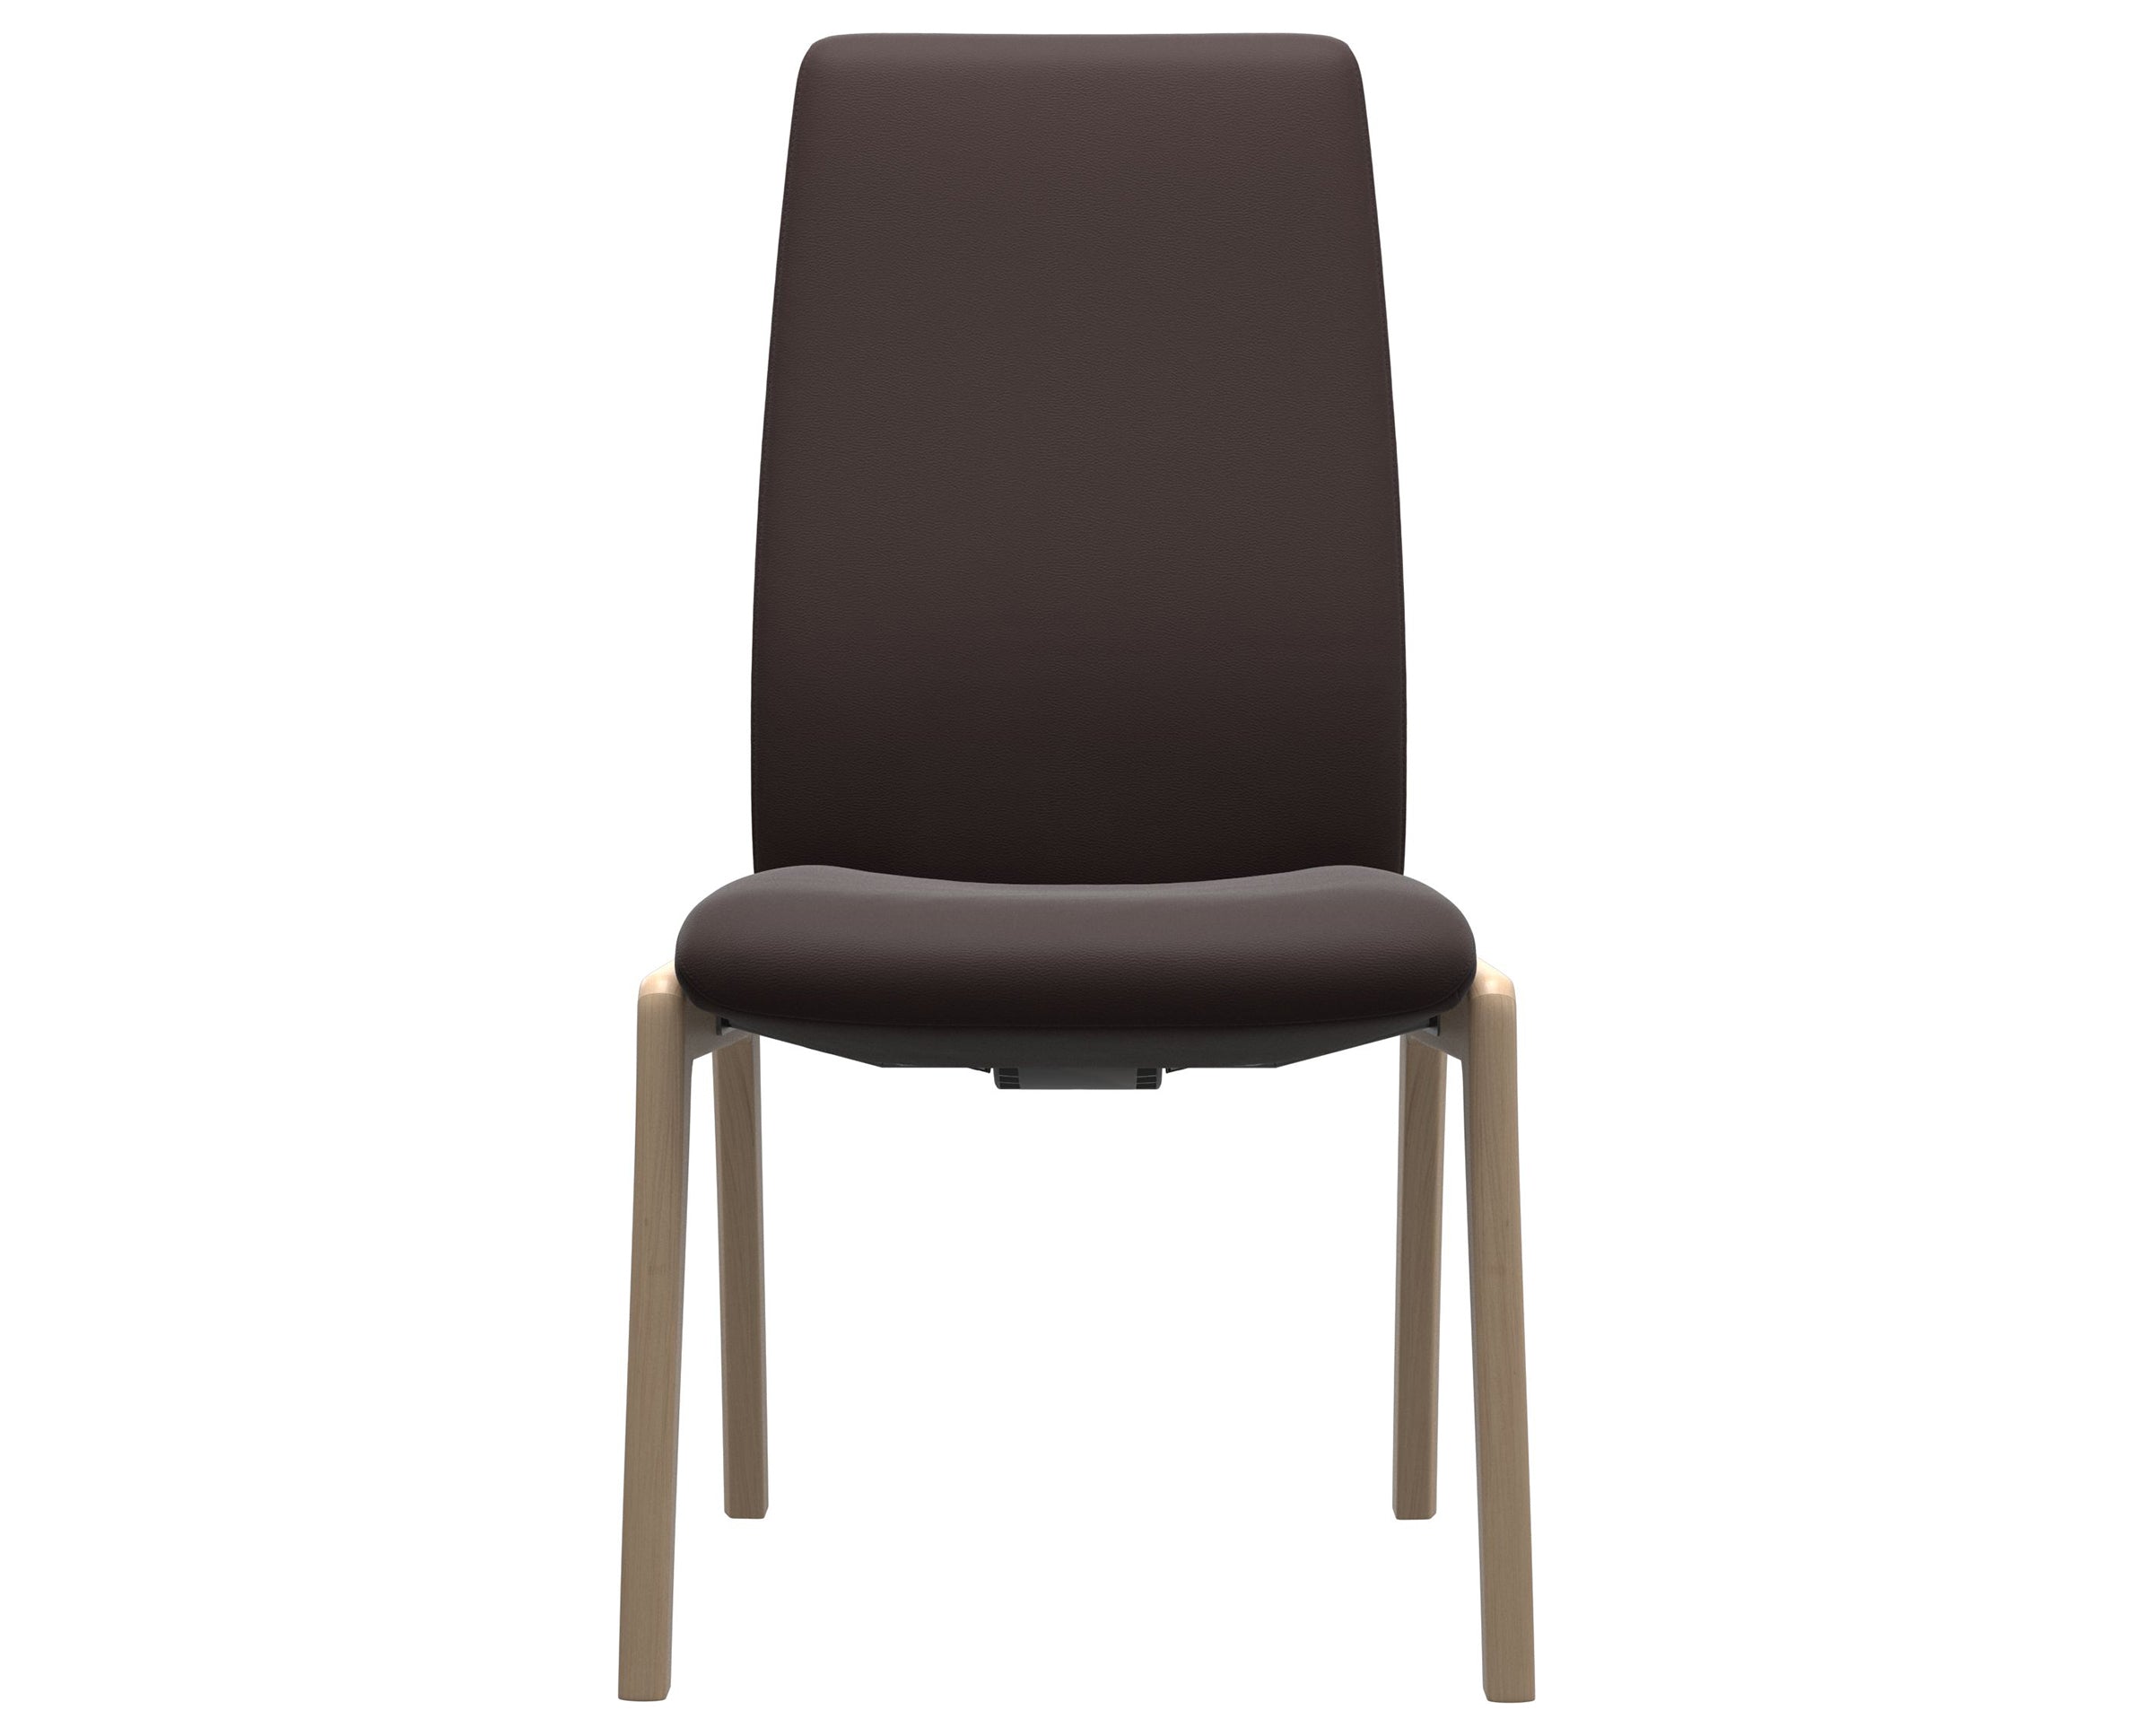 Paloma Leather Chocolate and Natural Base | Stressless Laurel High Back D100 Dining Chair | Valley Ridge Furniture